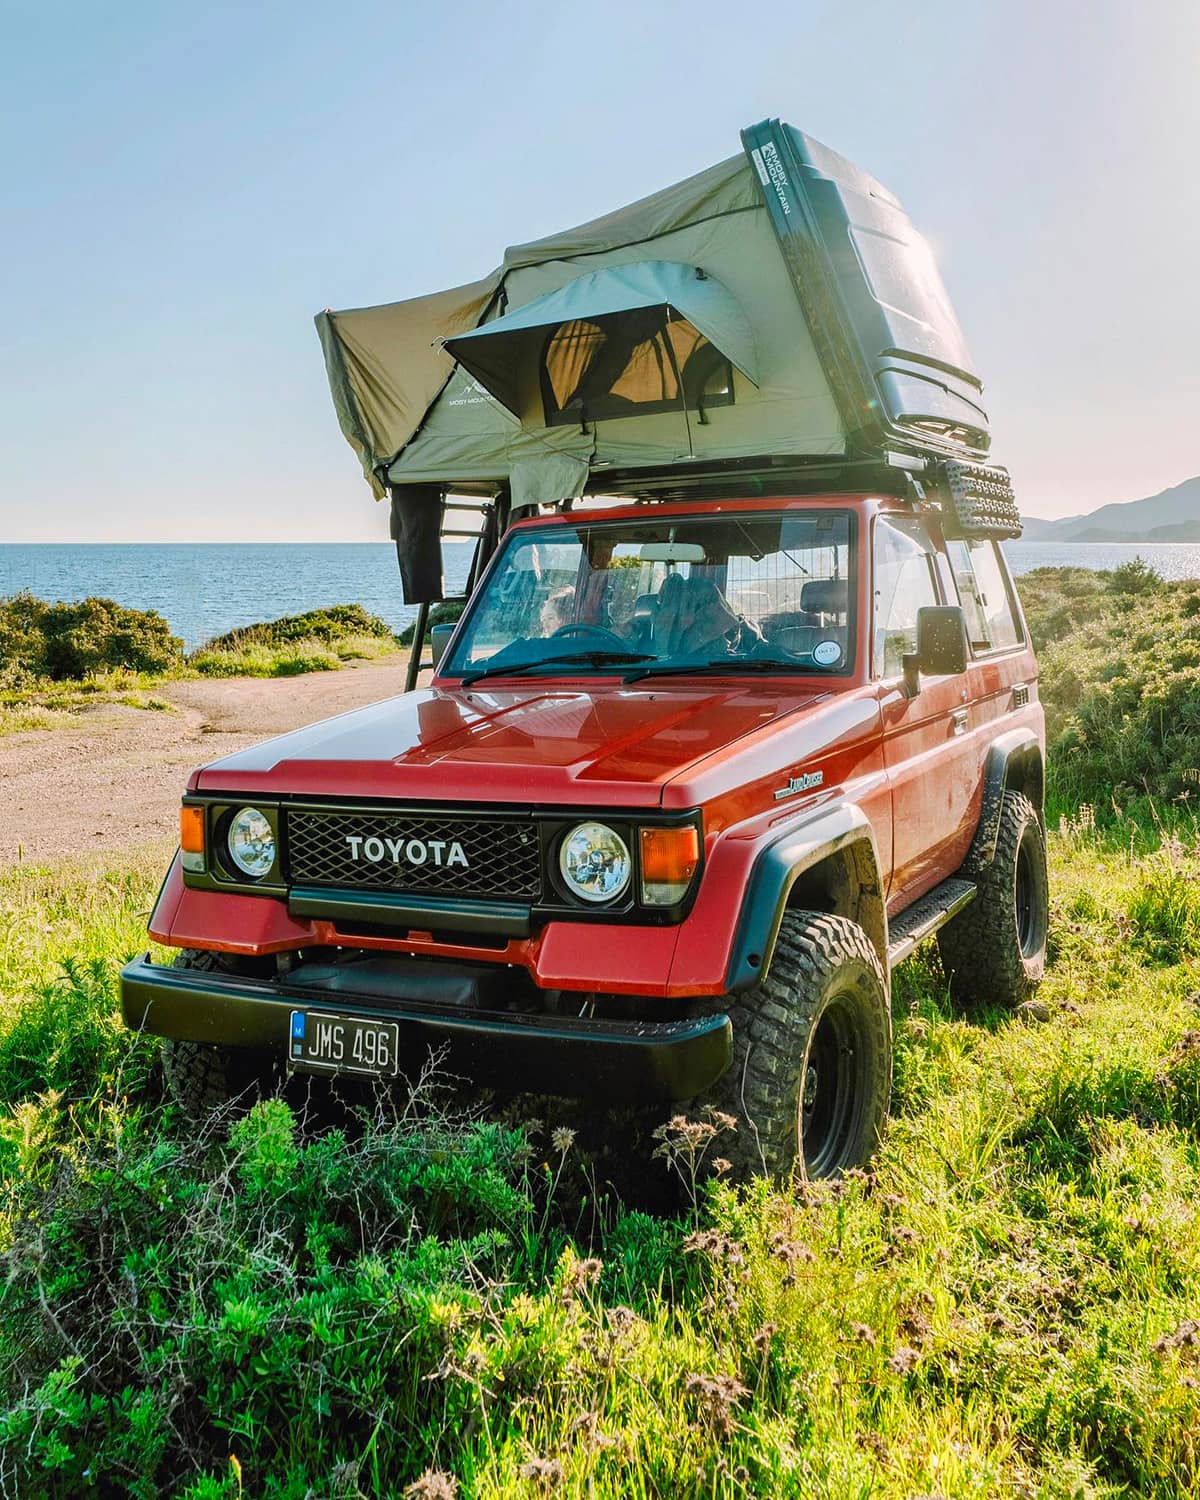 Toyota Land Cruiser 70 with a Hard shel roof top tent for overlanding